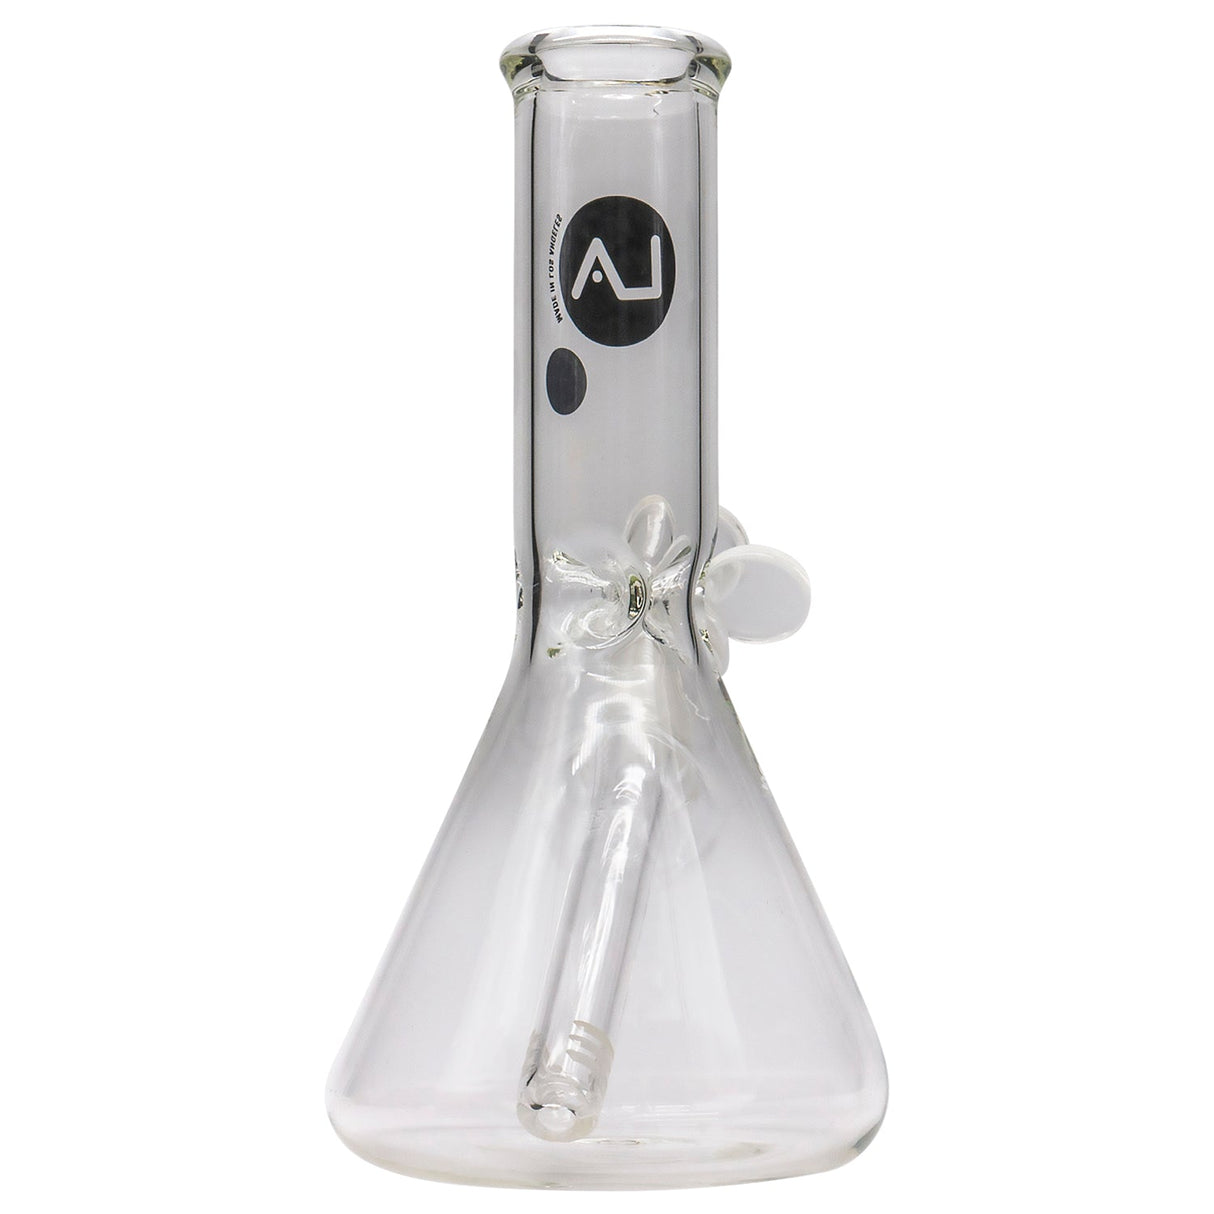 LA Pipes Basic Beaker Water Pipe, clear borosilicate glass, 8" tall, front view on white background